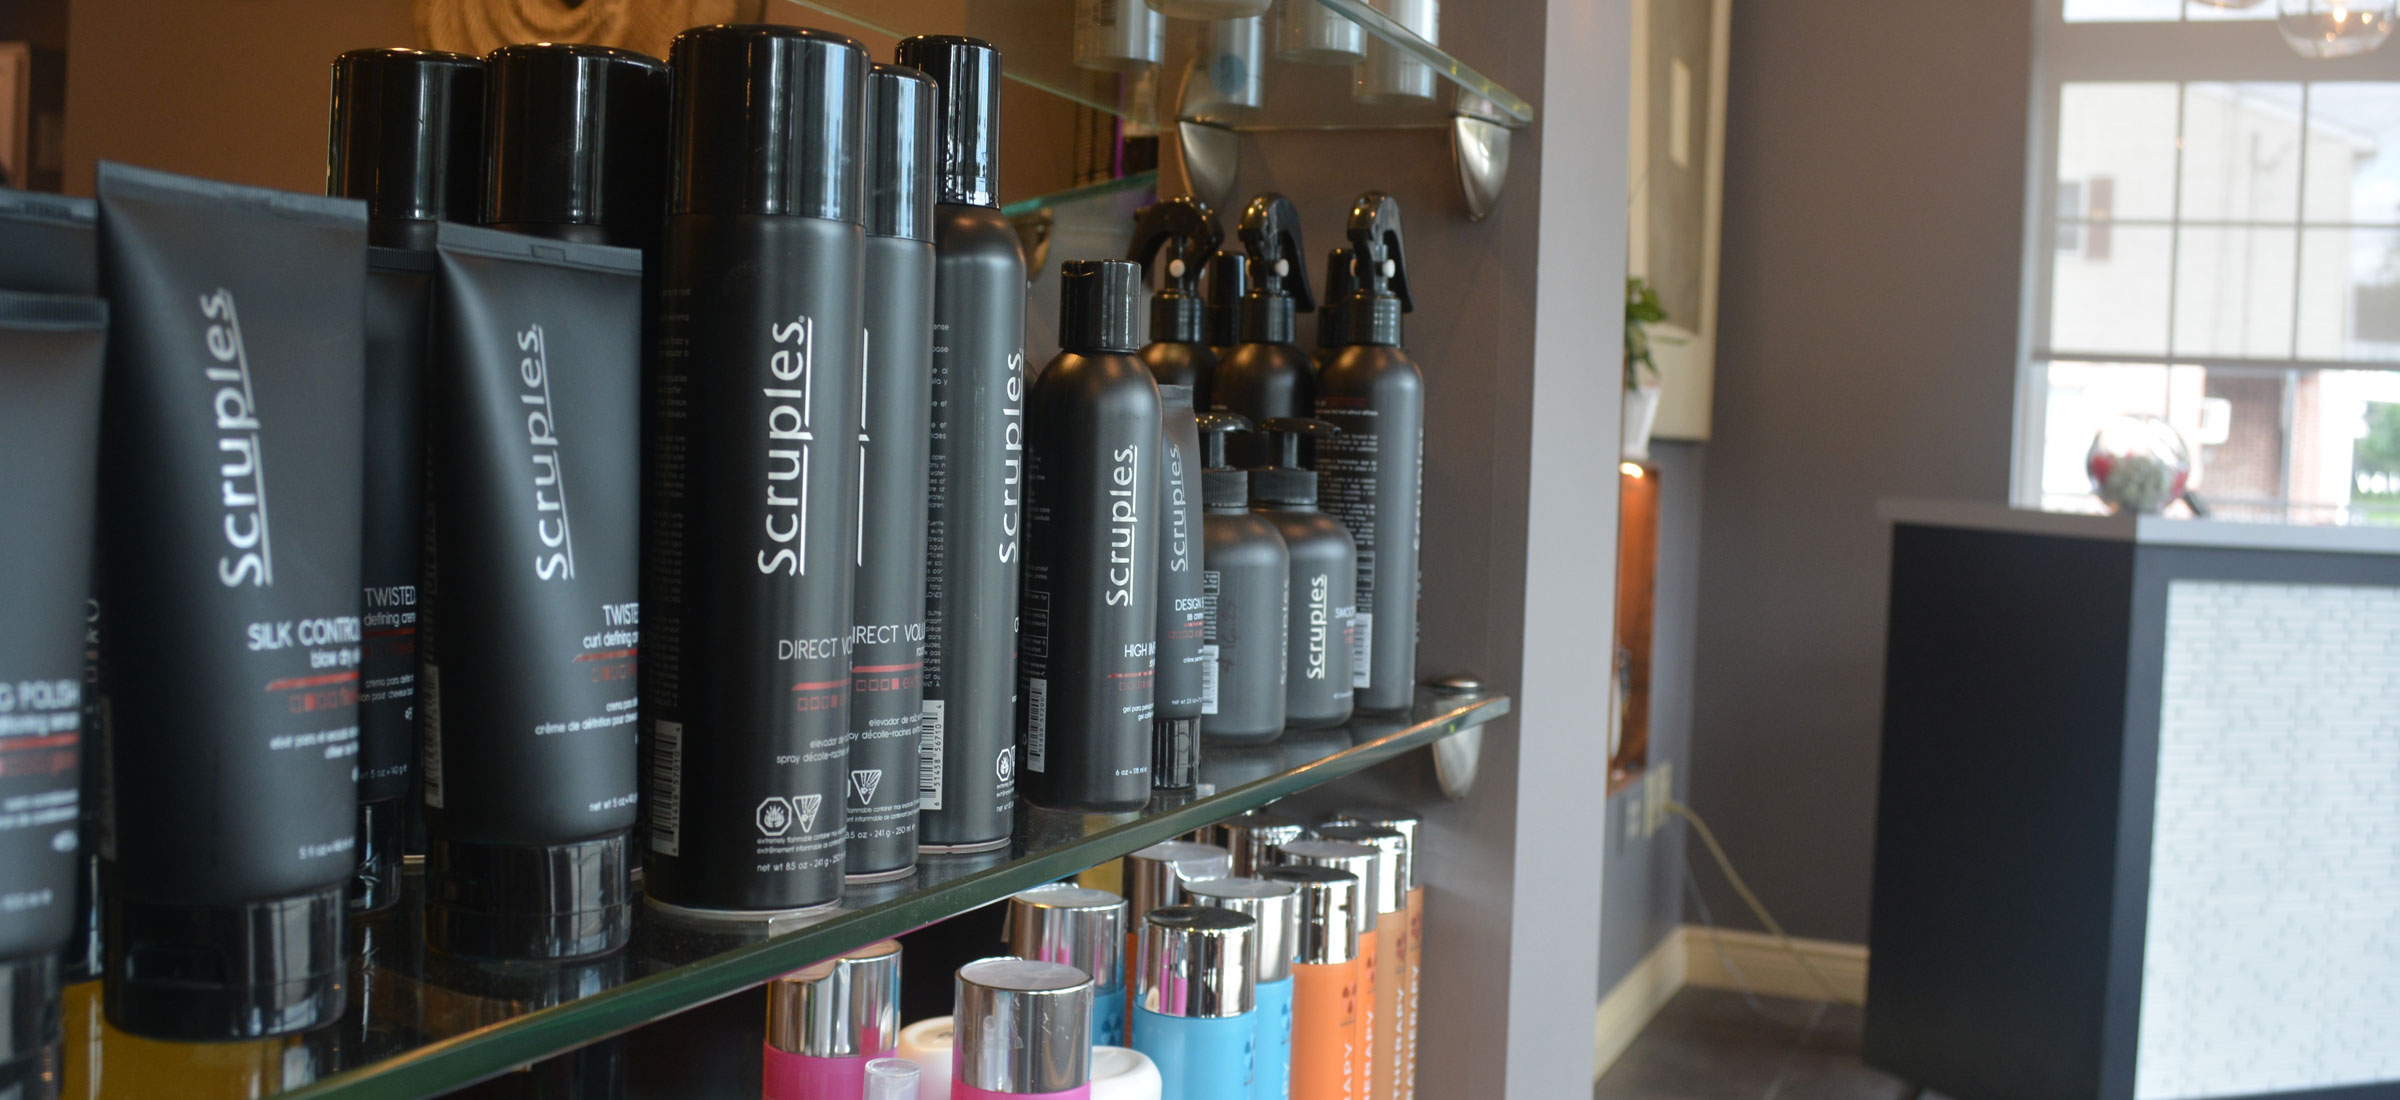 View of products on our shelves